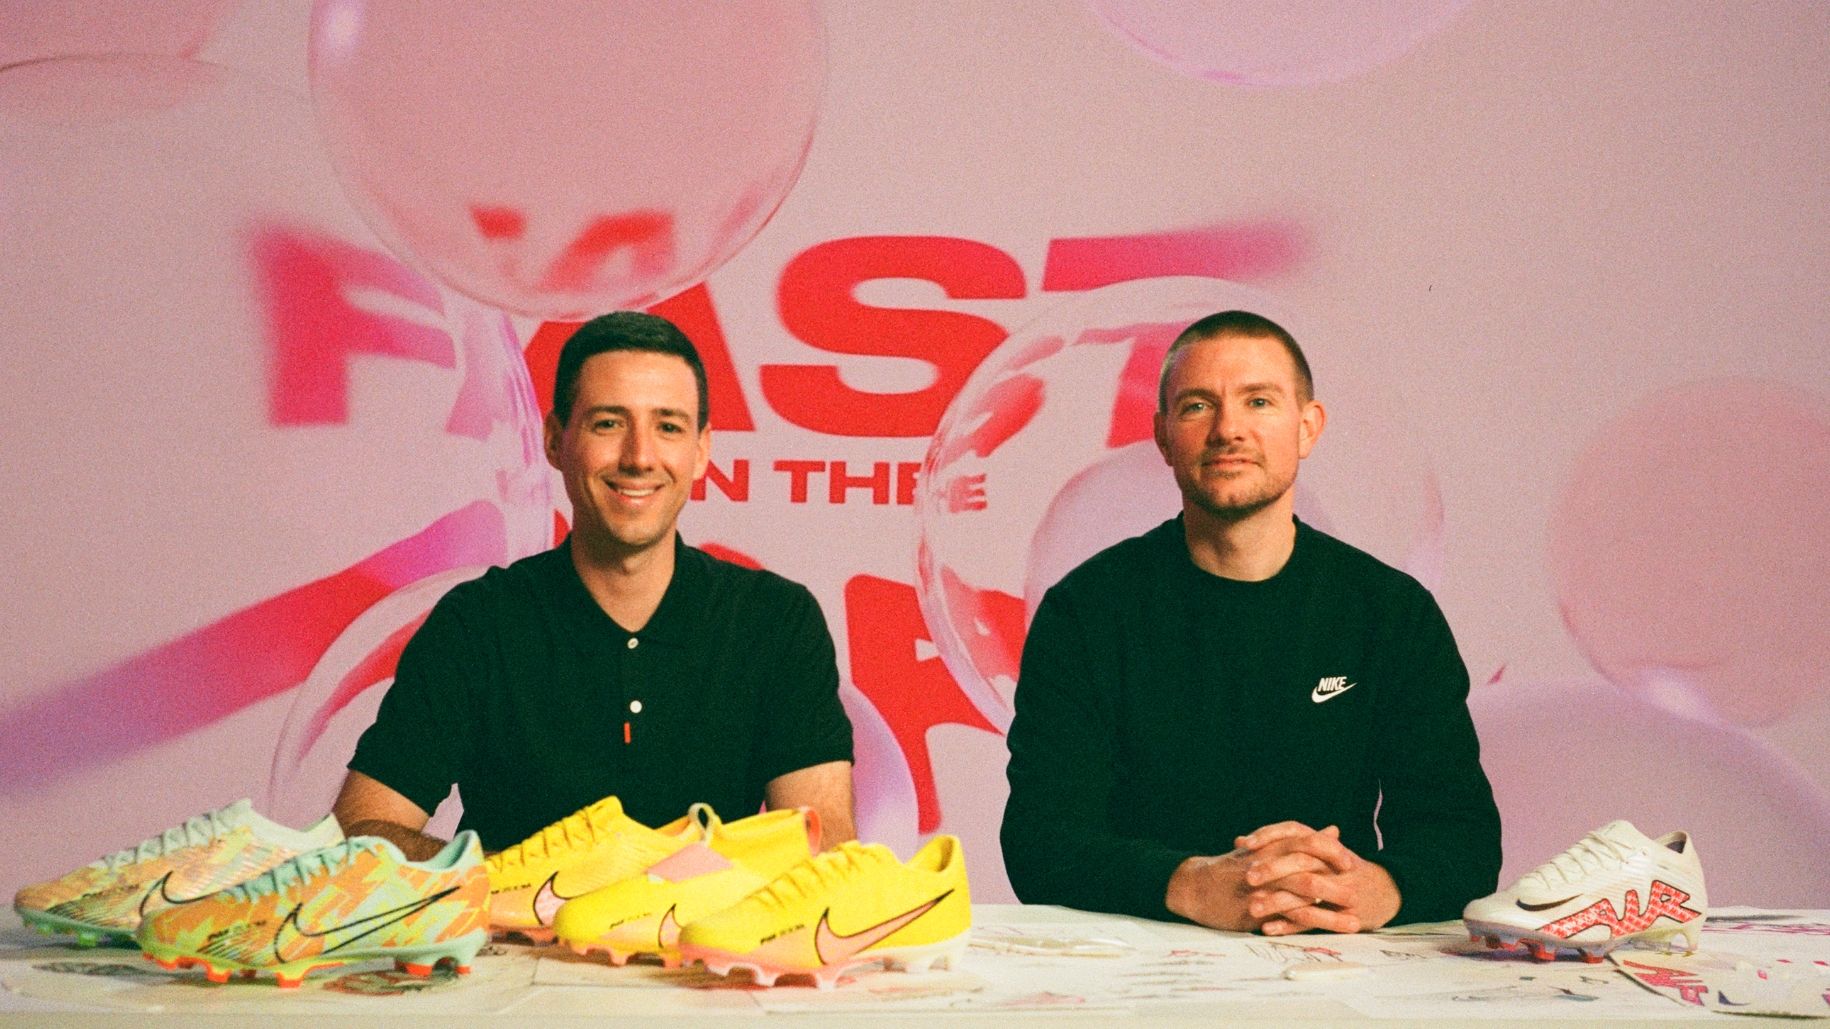 Two event hosts sitting at desk with Nike Mercurial boots in all colorways on desk. Fast is in the air with Bubbles is the background